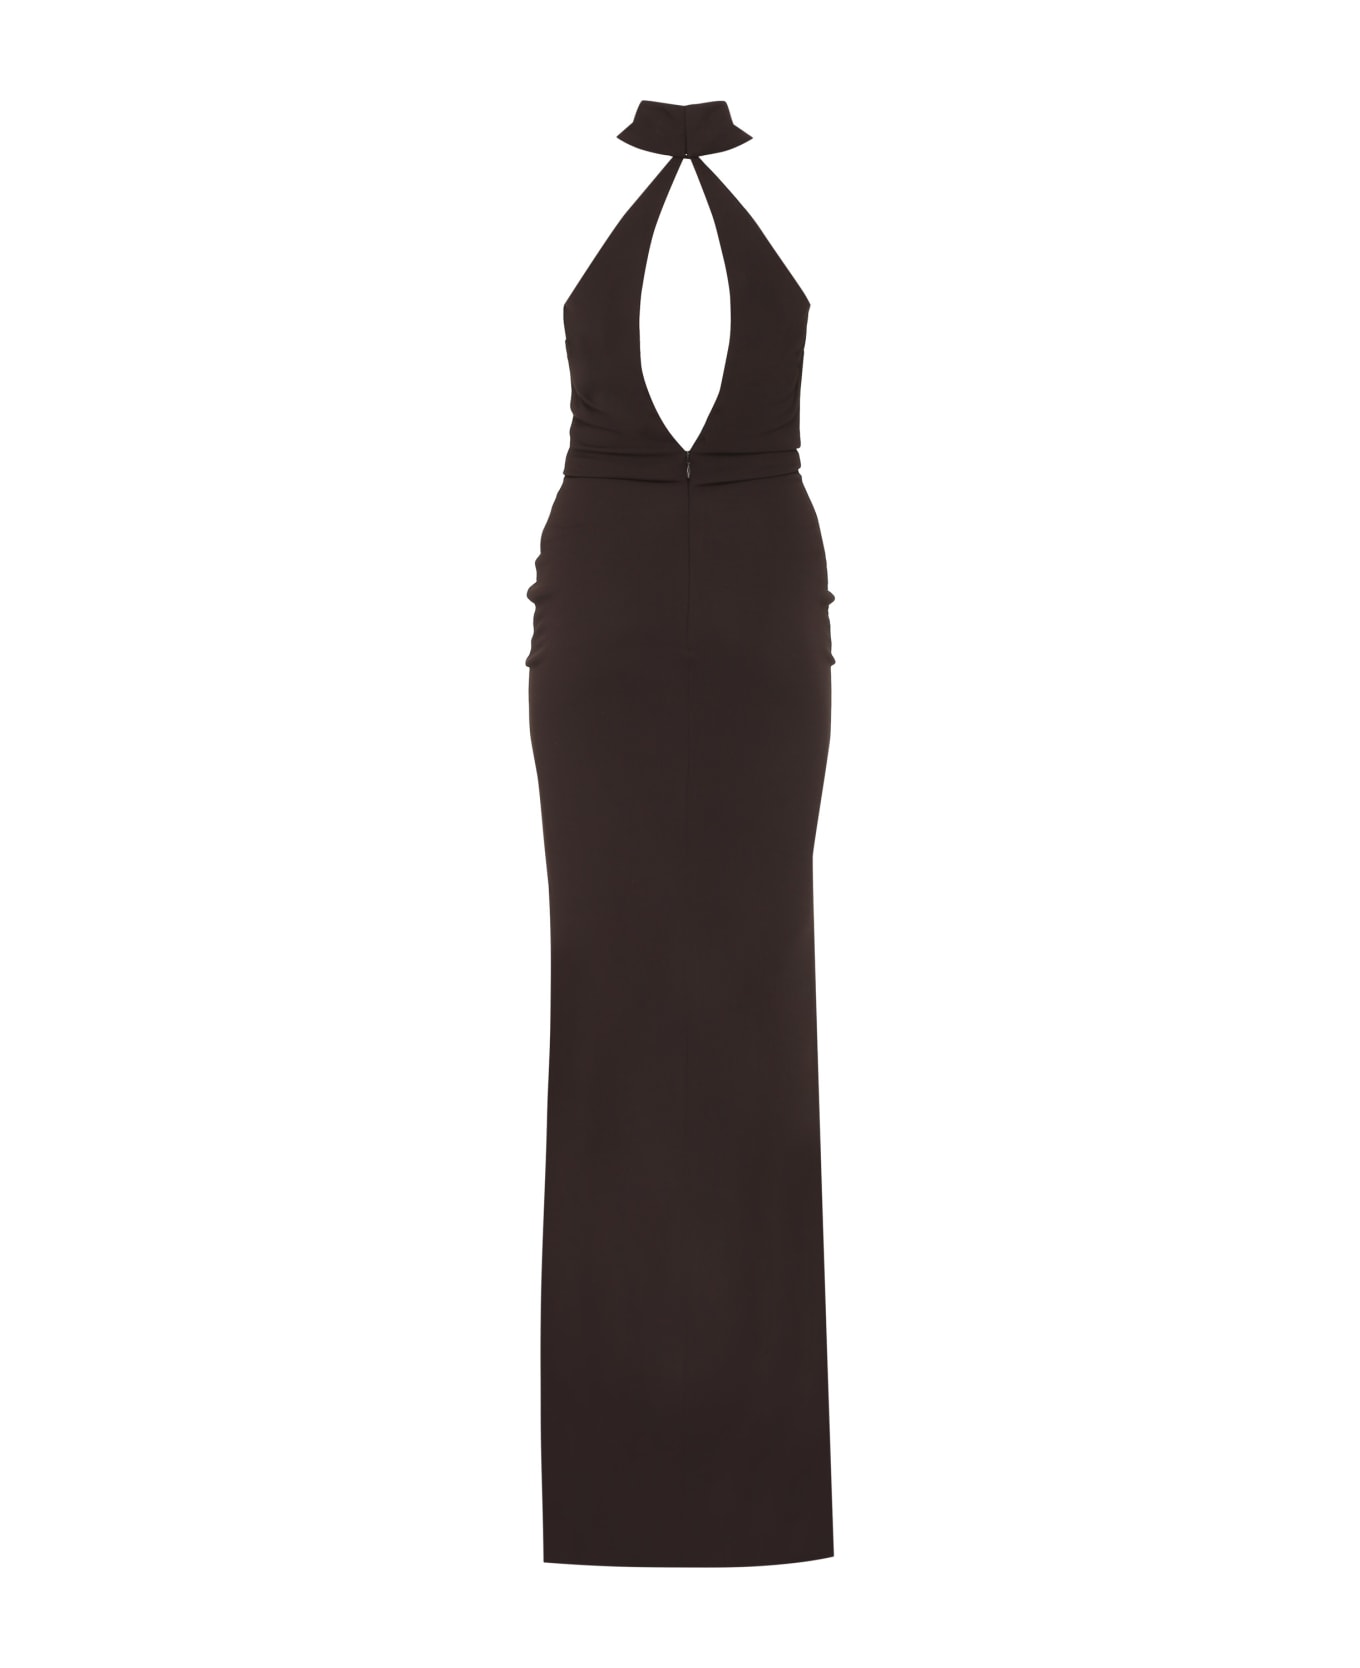 Tom Ford Jersey Dress - brown